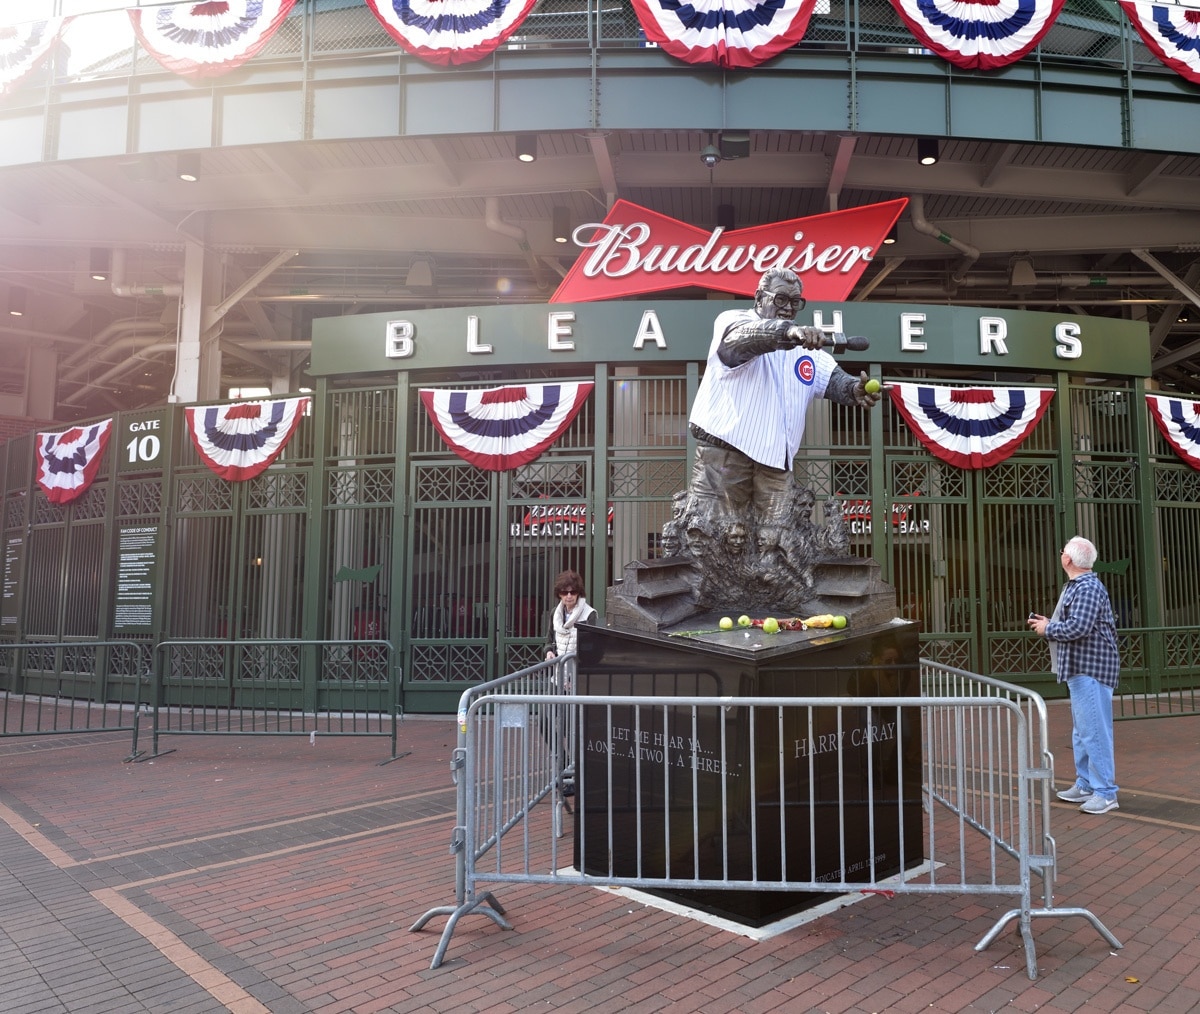 Wrigley Field gates will open 90 minutes to game time in 2023